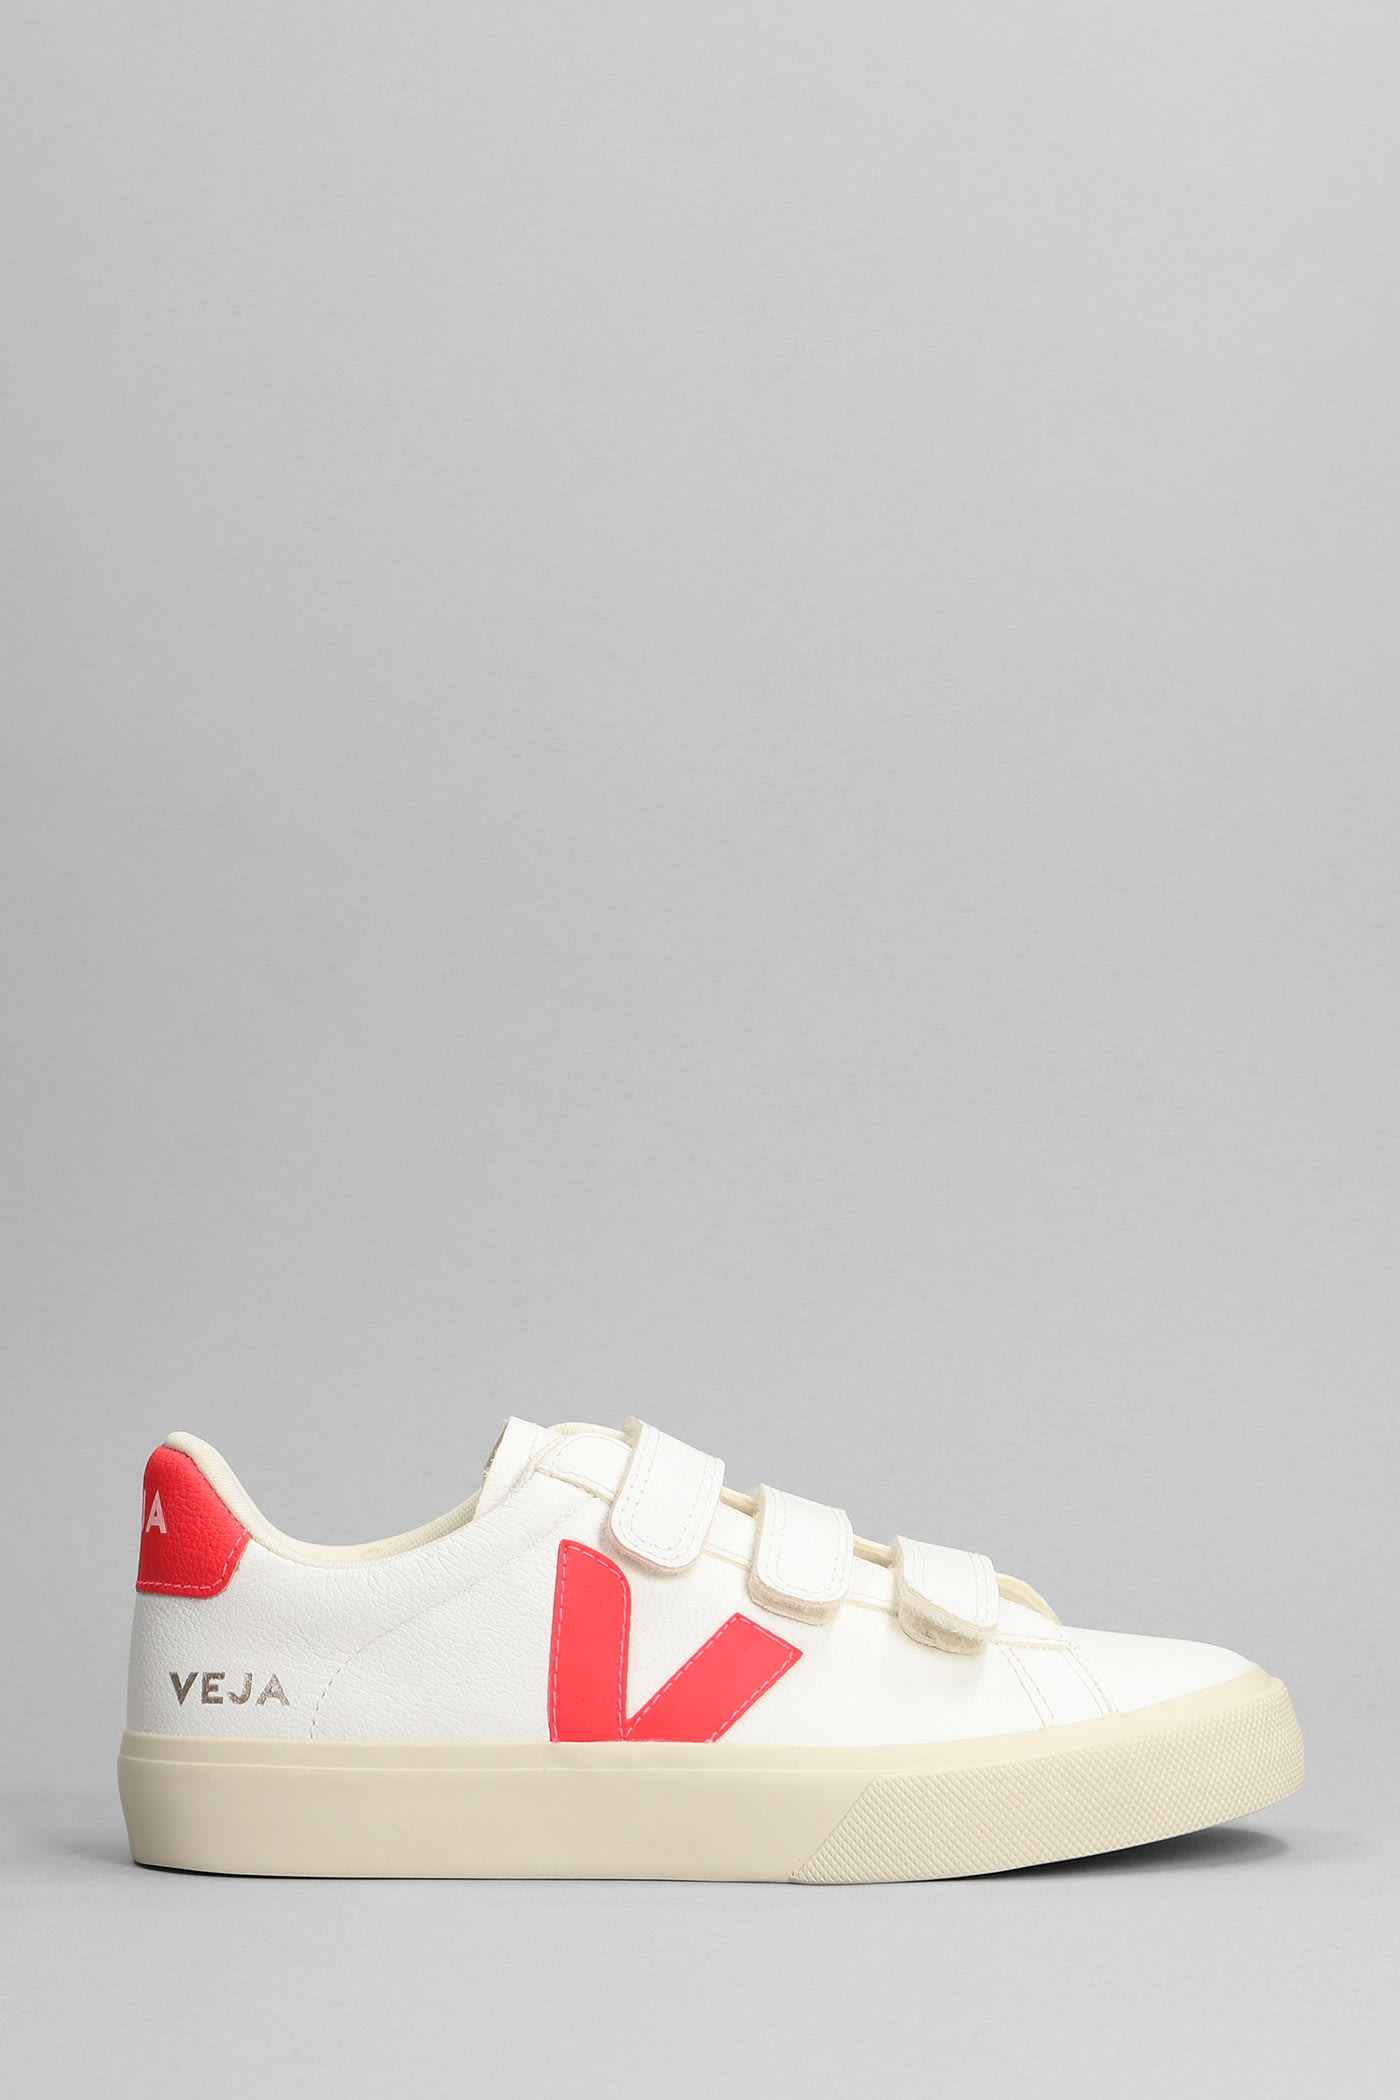 VEJA RECIFE SNEAKERS IN WHITE LEATHER